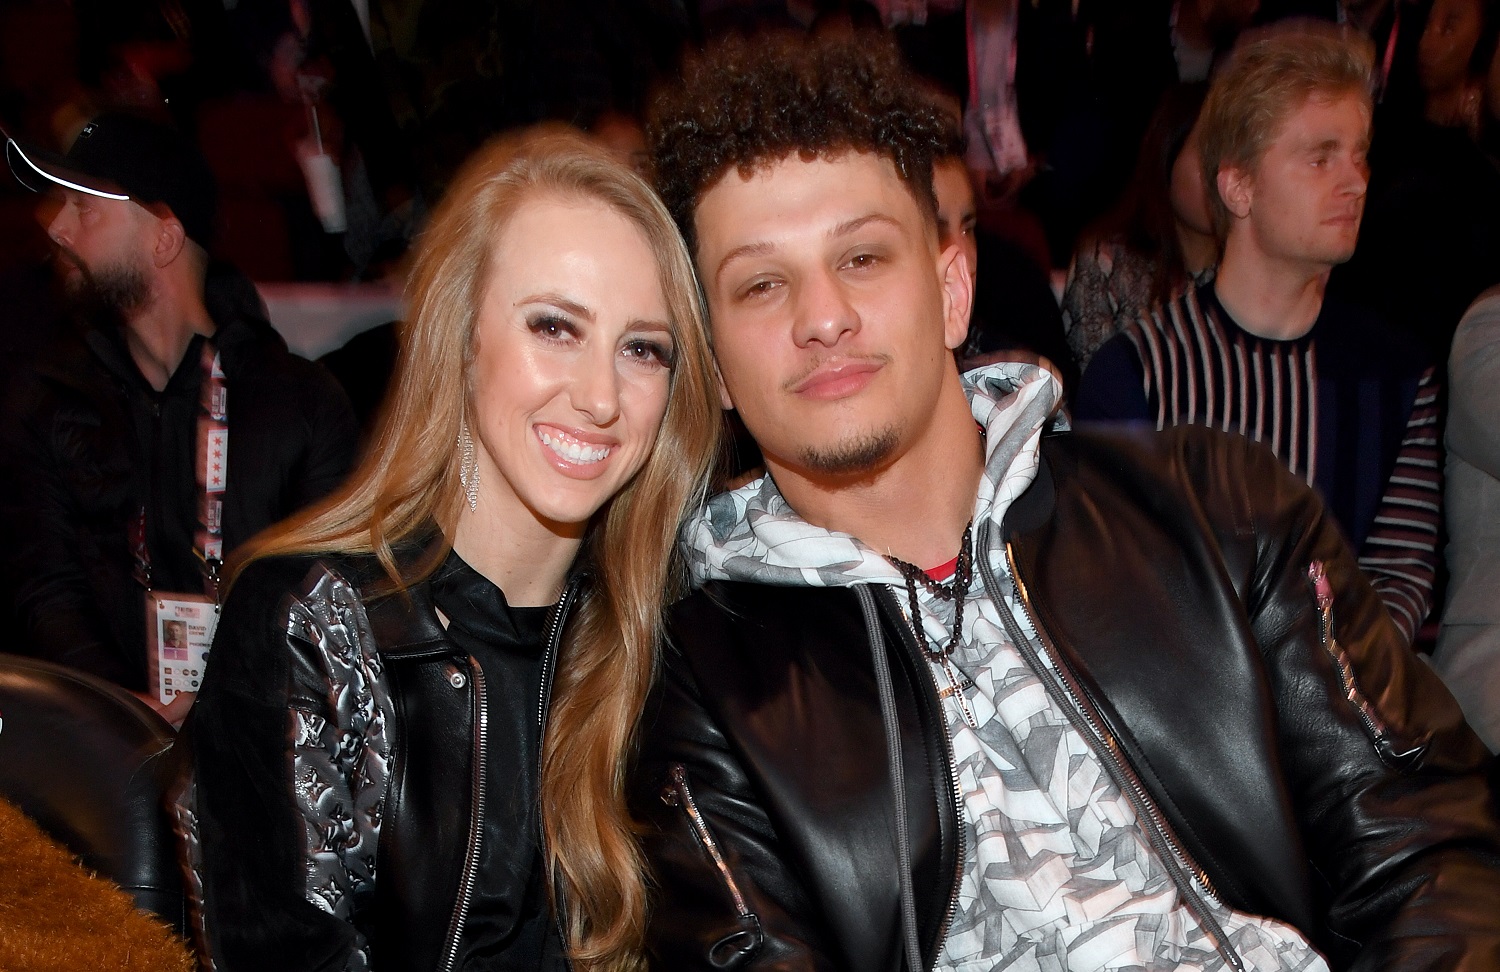 Brittany Matthews Mocks the NFL Experts Who Hyped Josh Allen Over Fiancé Patrick Mahomes